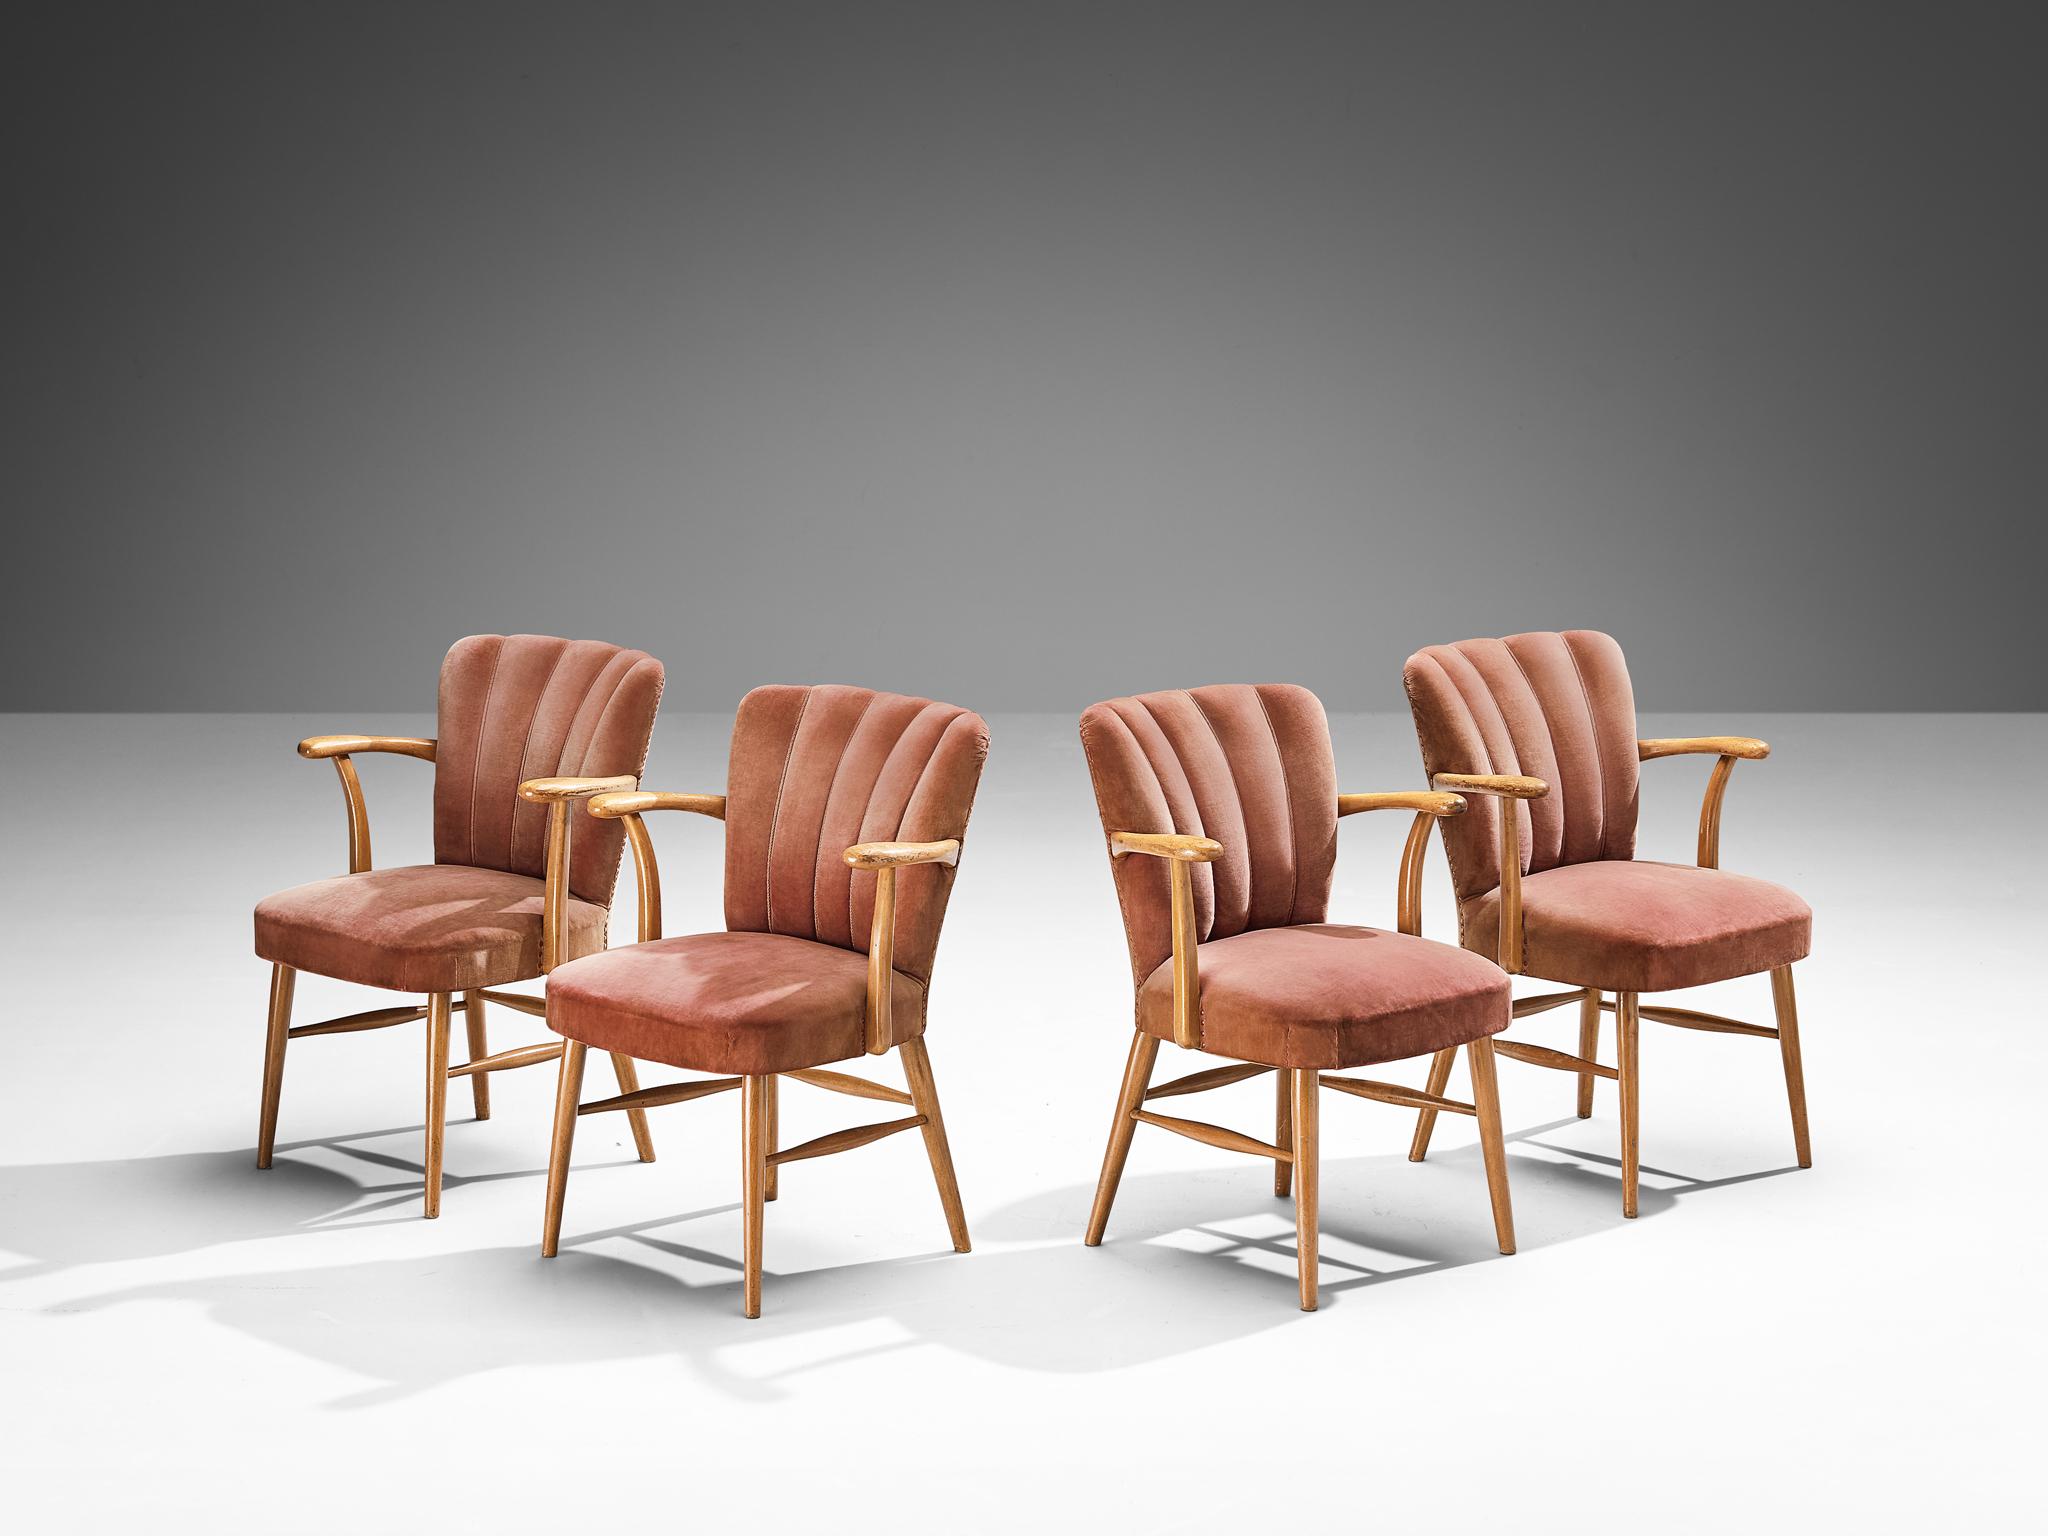 Armchairs, velvet, beech, brass, Europe, 1950s

Elegant armchairs in a soft pink velvet upholstery. A beech frame with armrests holds the seat and backrest that is highlighted with vertical lines ending in soft curves on top. The tufted lines